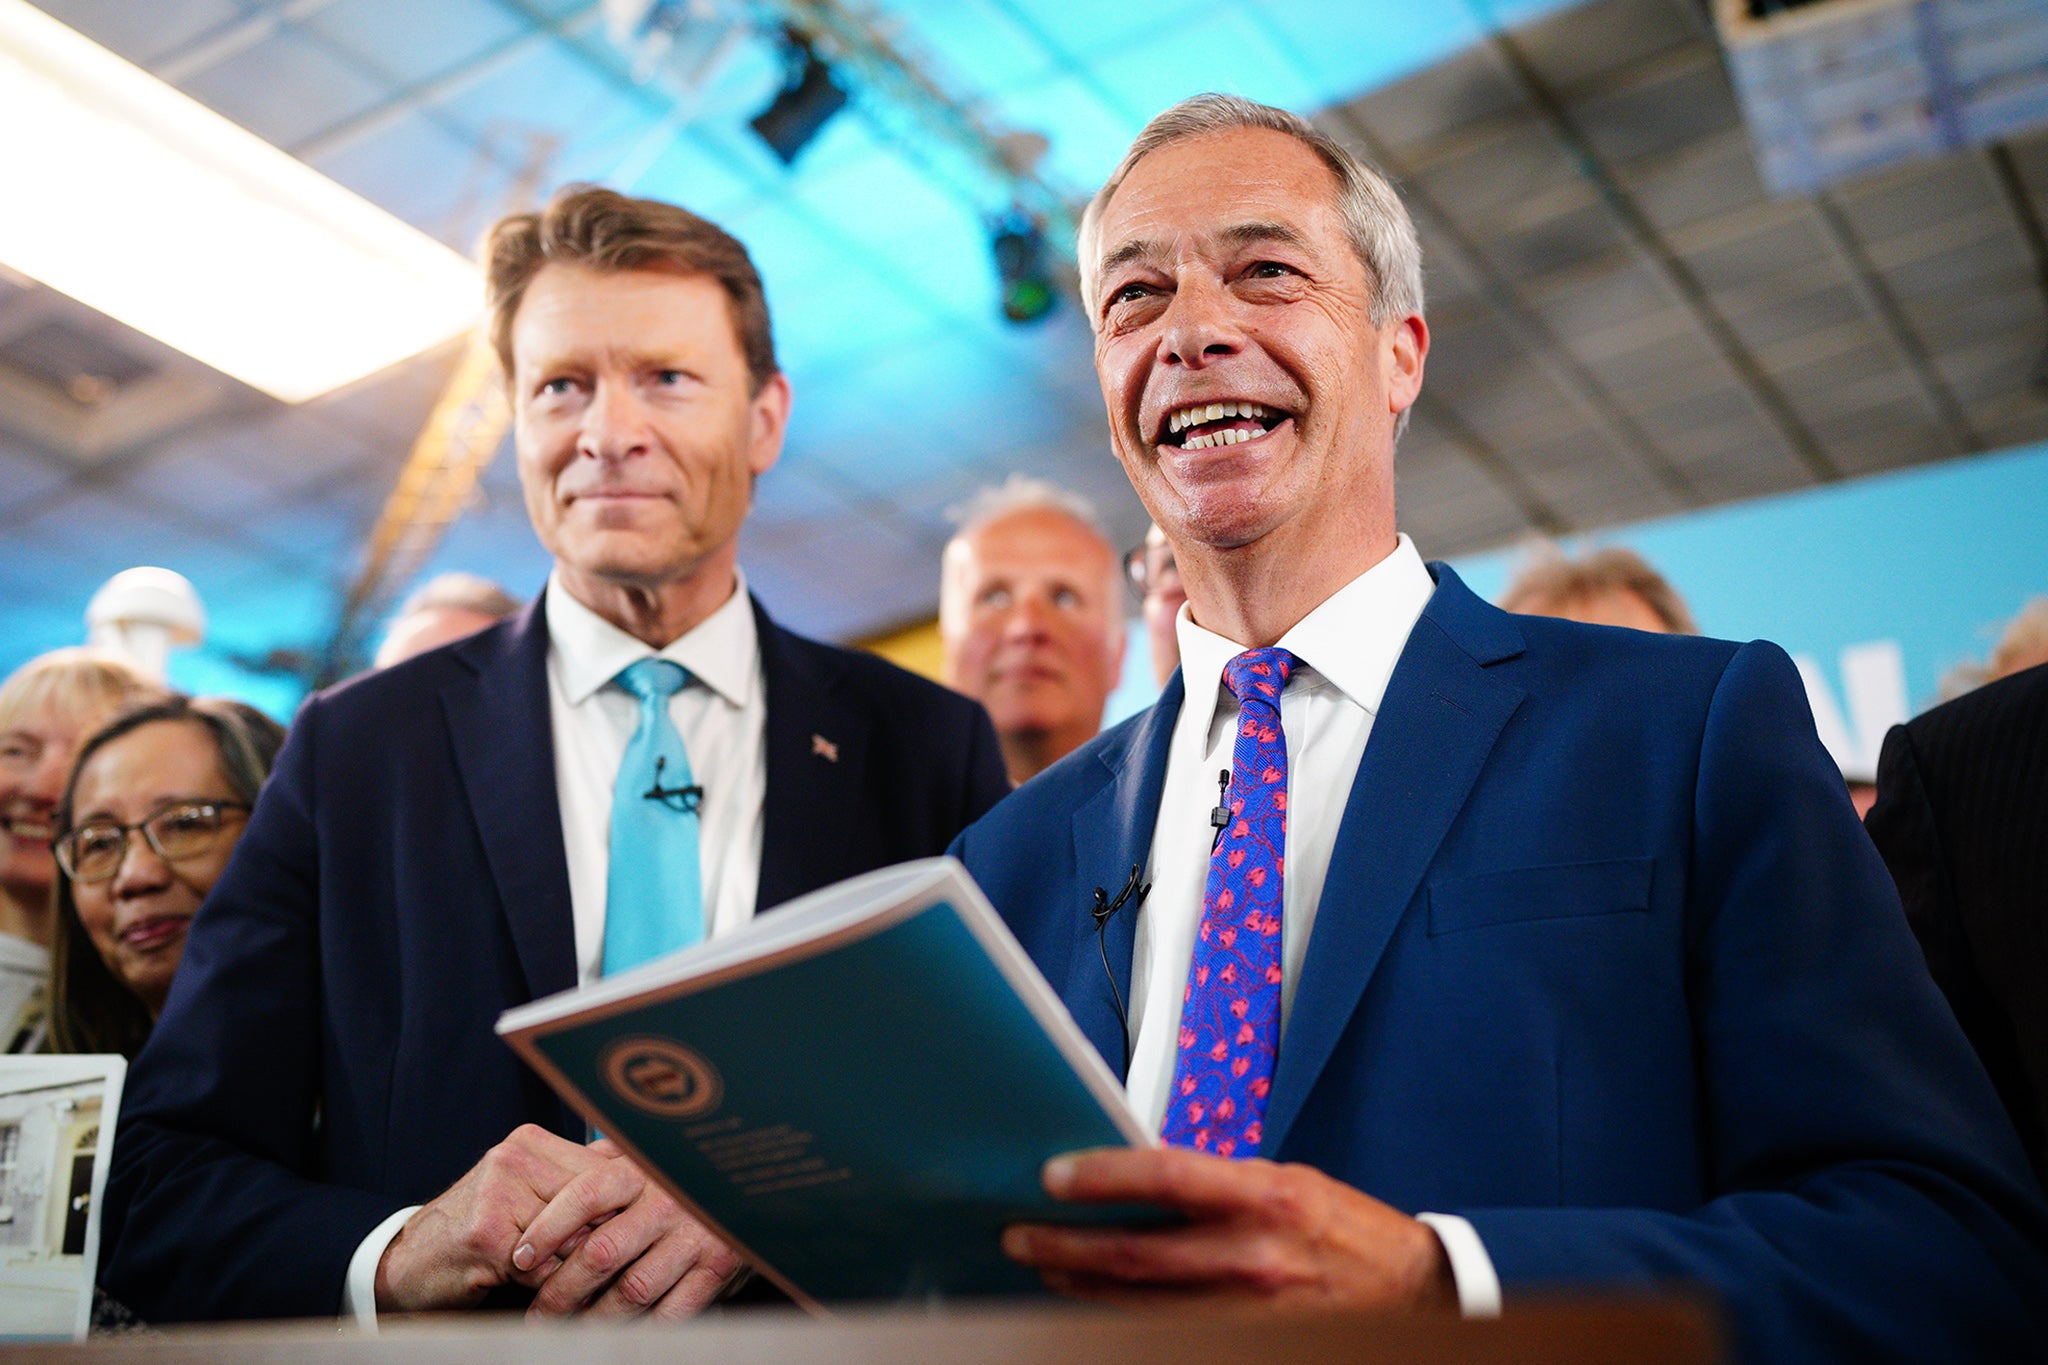 Nigel Farage signed Reform’s contract with voters alongside party chairman Richard Tice on Monday